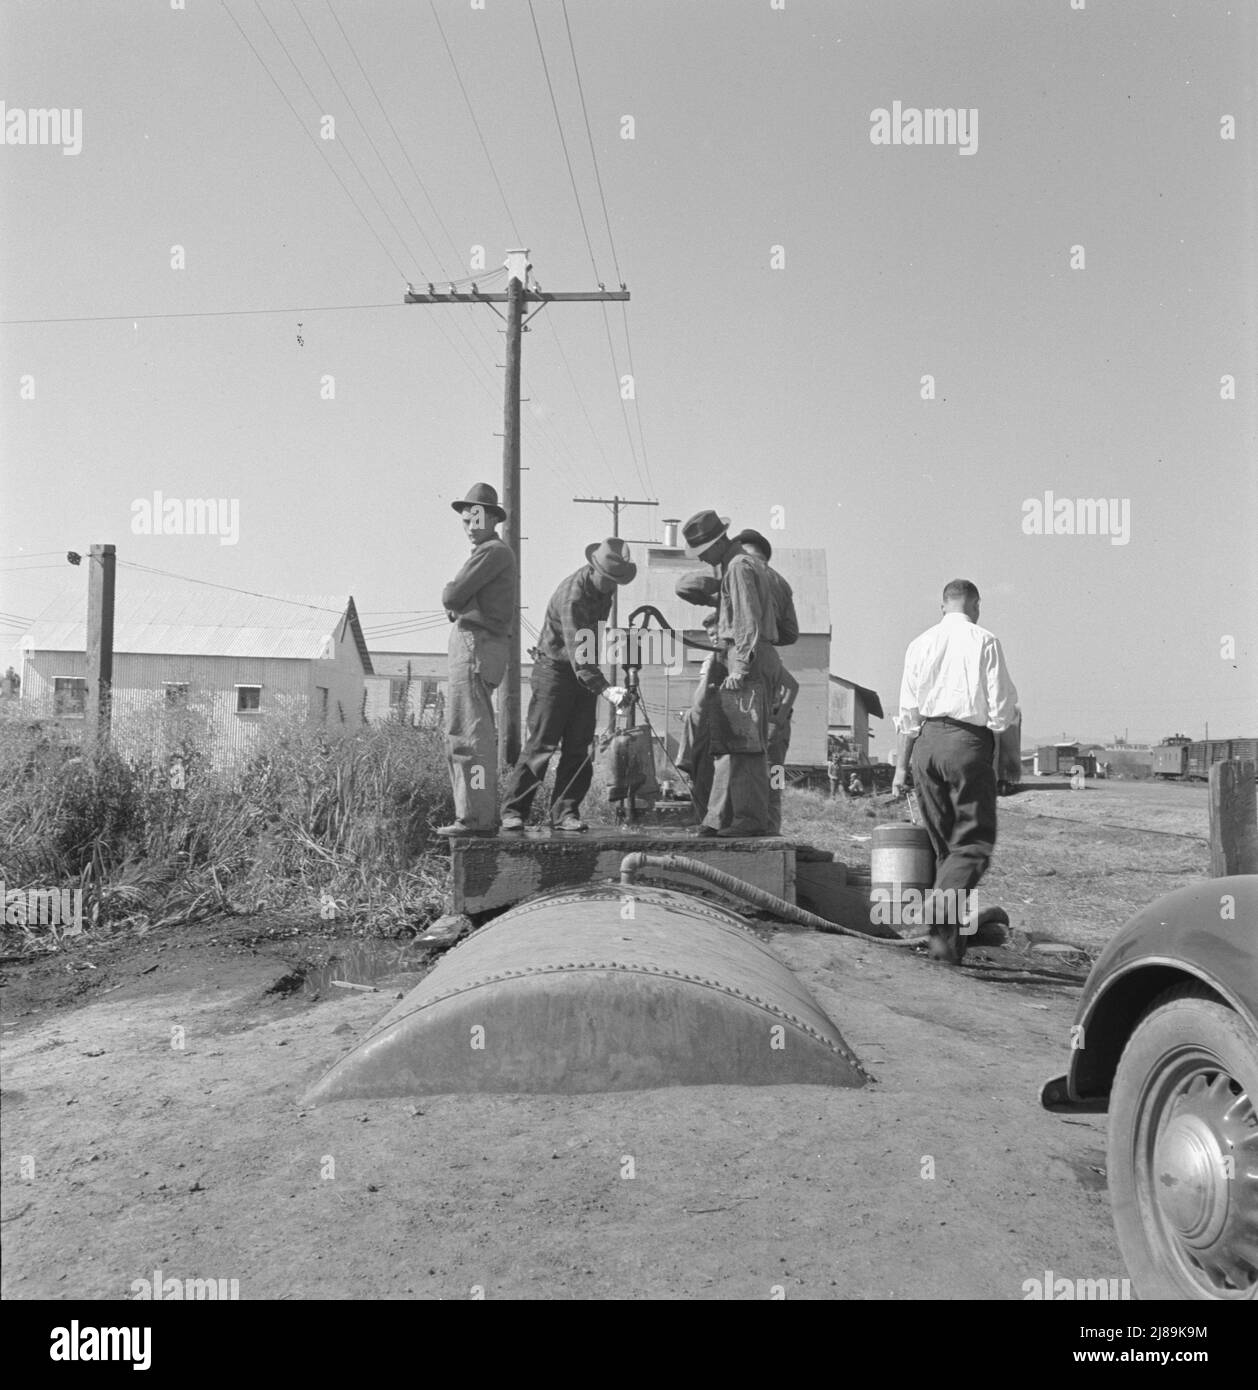 Town pump of Tulelake at railroad yard. Tulelake, Siskiyou County, California. Over 1500 people depend on hauled water for drinking the year round. During potato harvest, this pump also serves the migratory pickers. Stock Photo